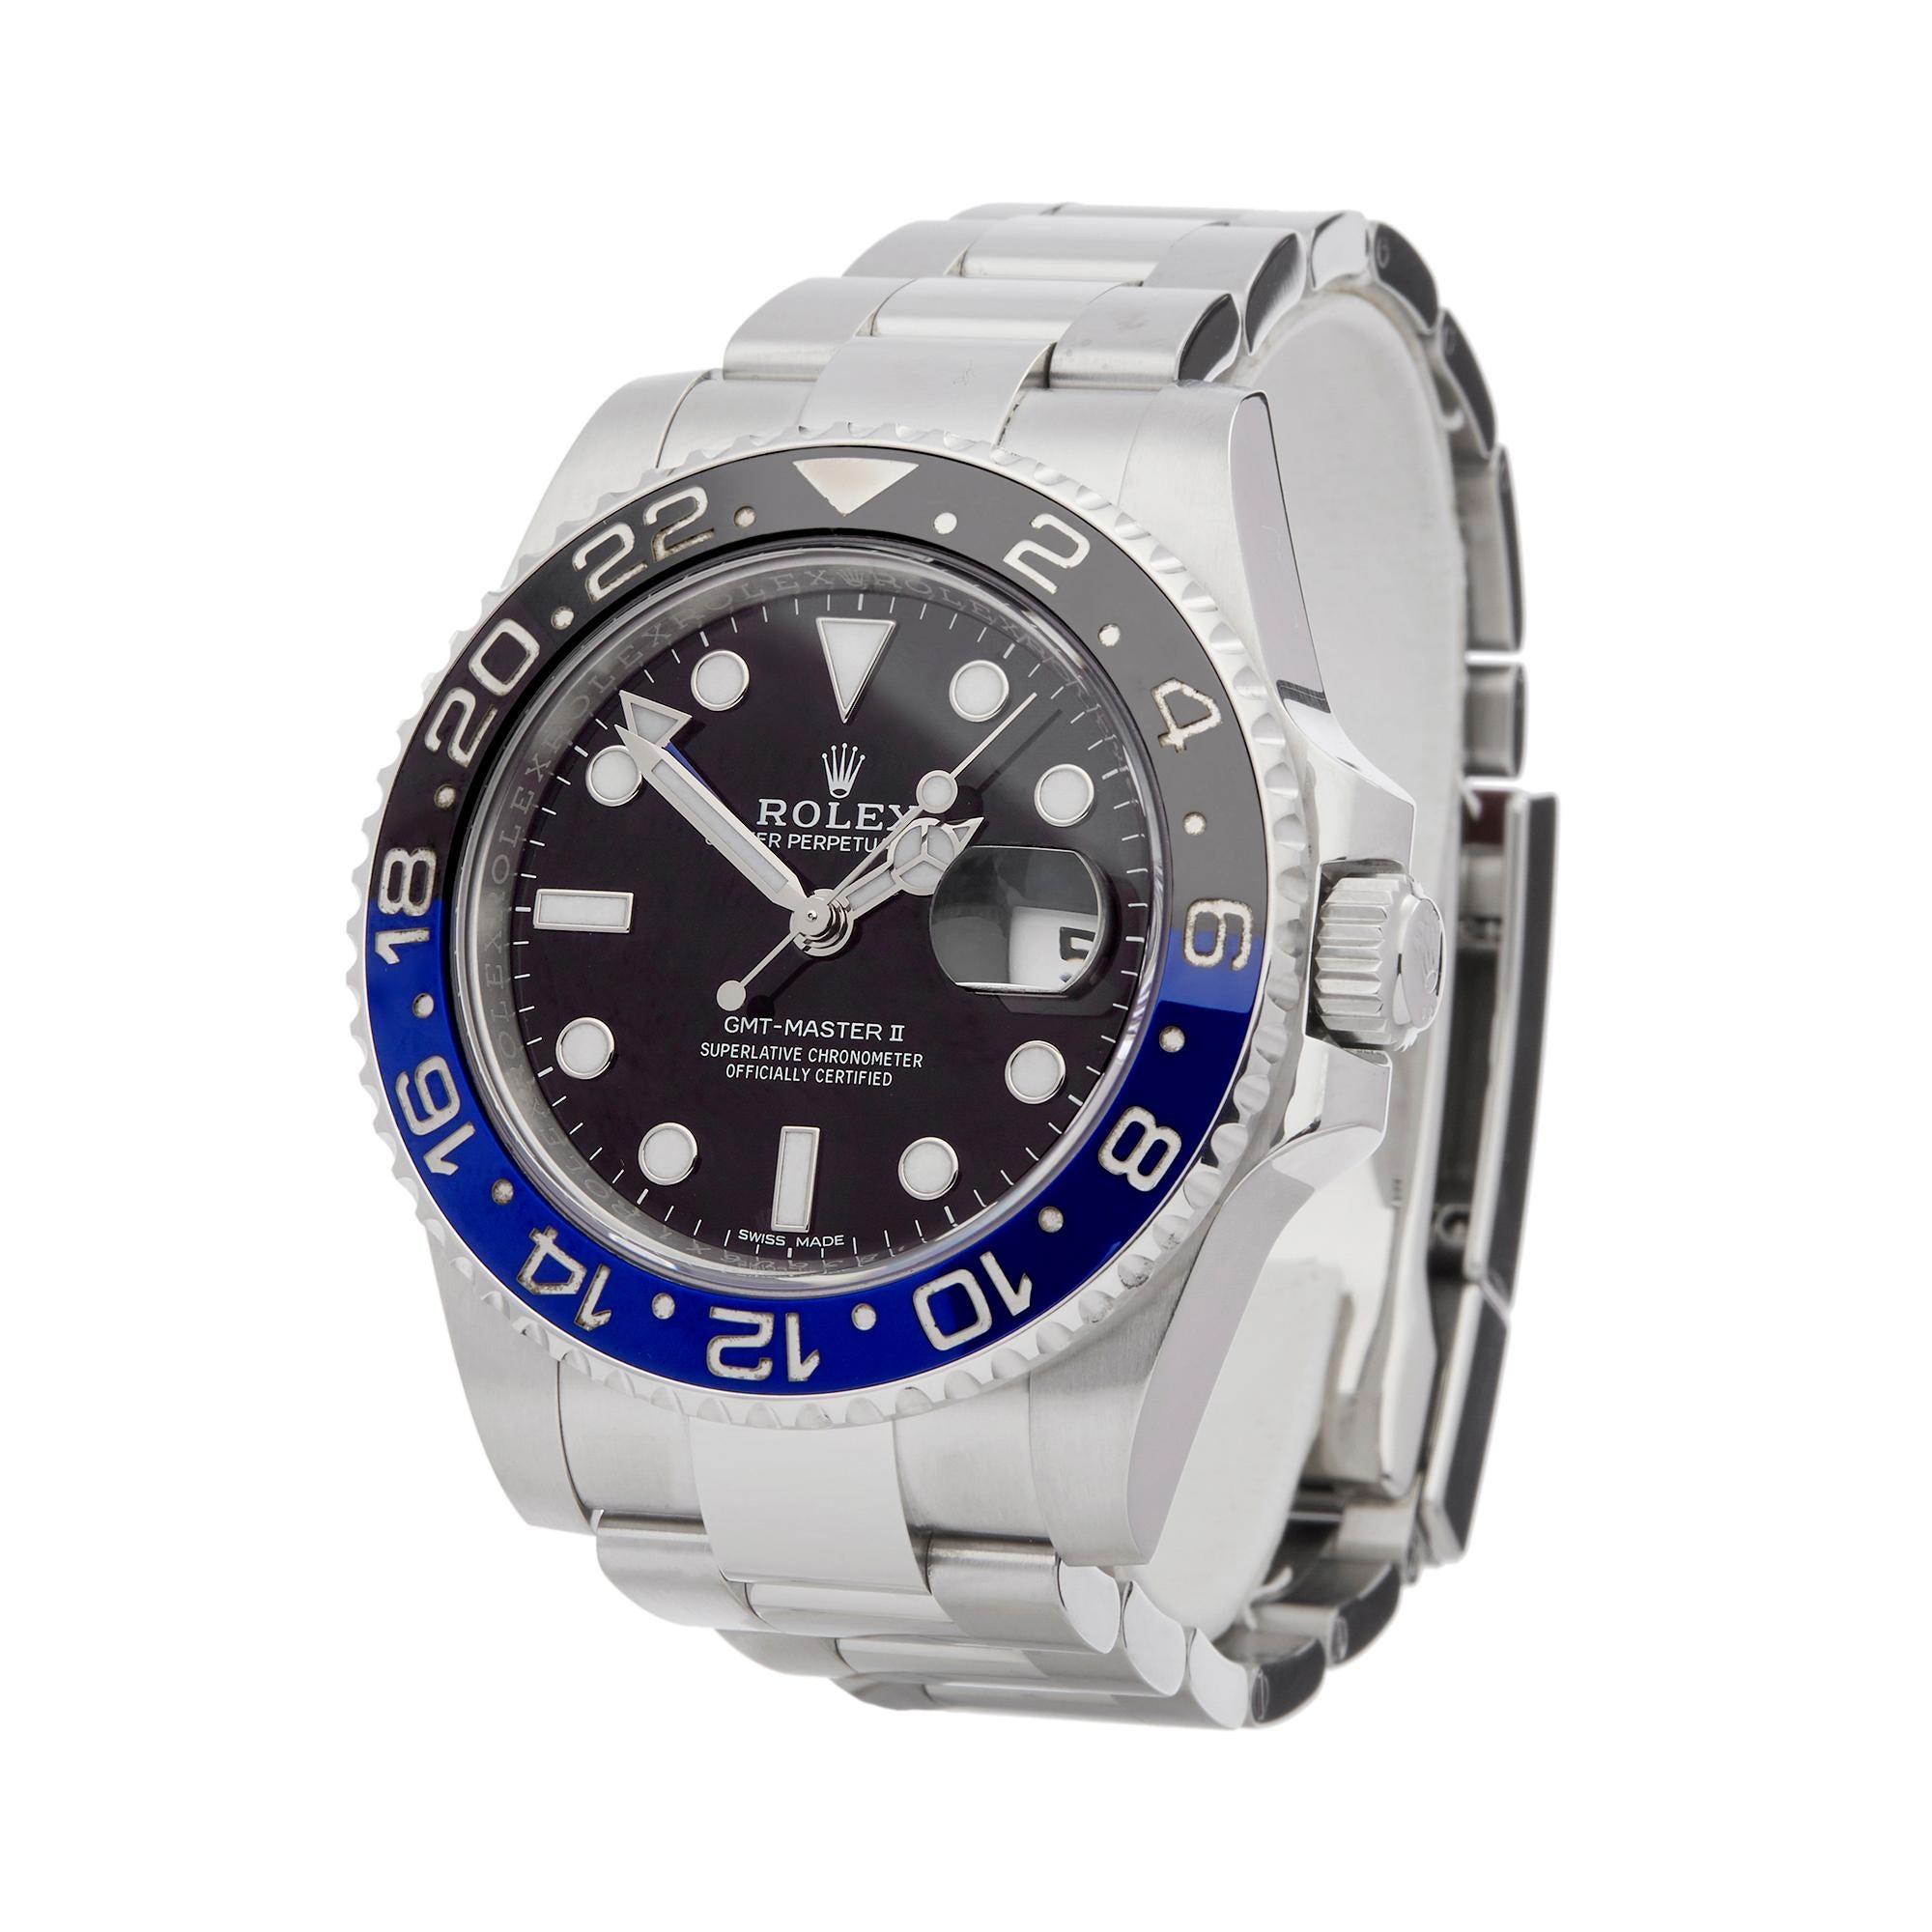 Ref: W6236
Manufacturer: Rolex
Model: GMT-Master II
Model Ref: 116710BLNR
Age: April 2017
Gender: Mens
Complete With: Box, Guarantee & Swing Tag
Dial: Black Other
Glass: Sapphire Crystal
Movement: Automatic
Water Resistance: To Manufacturers